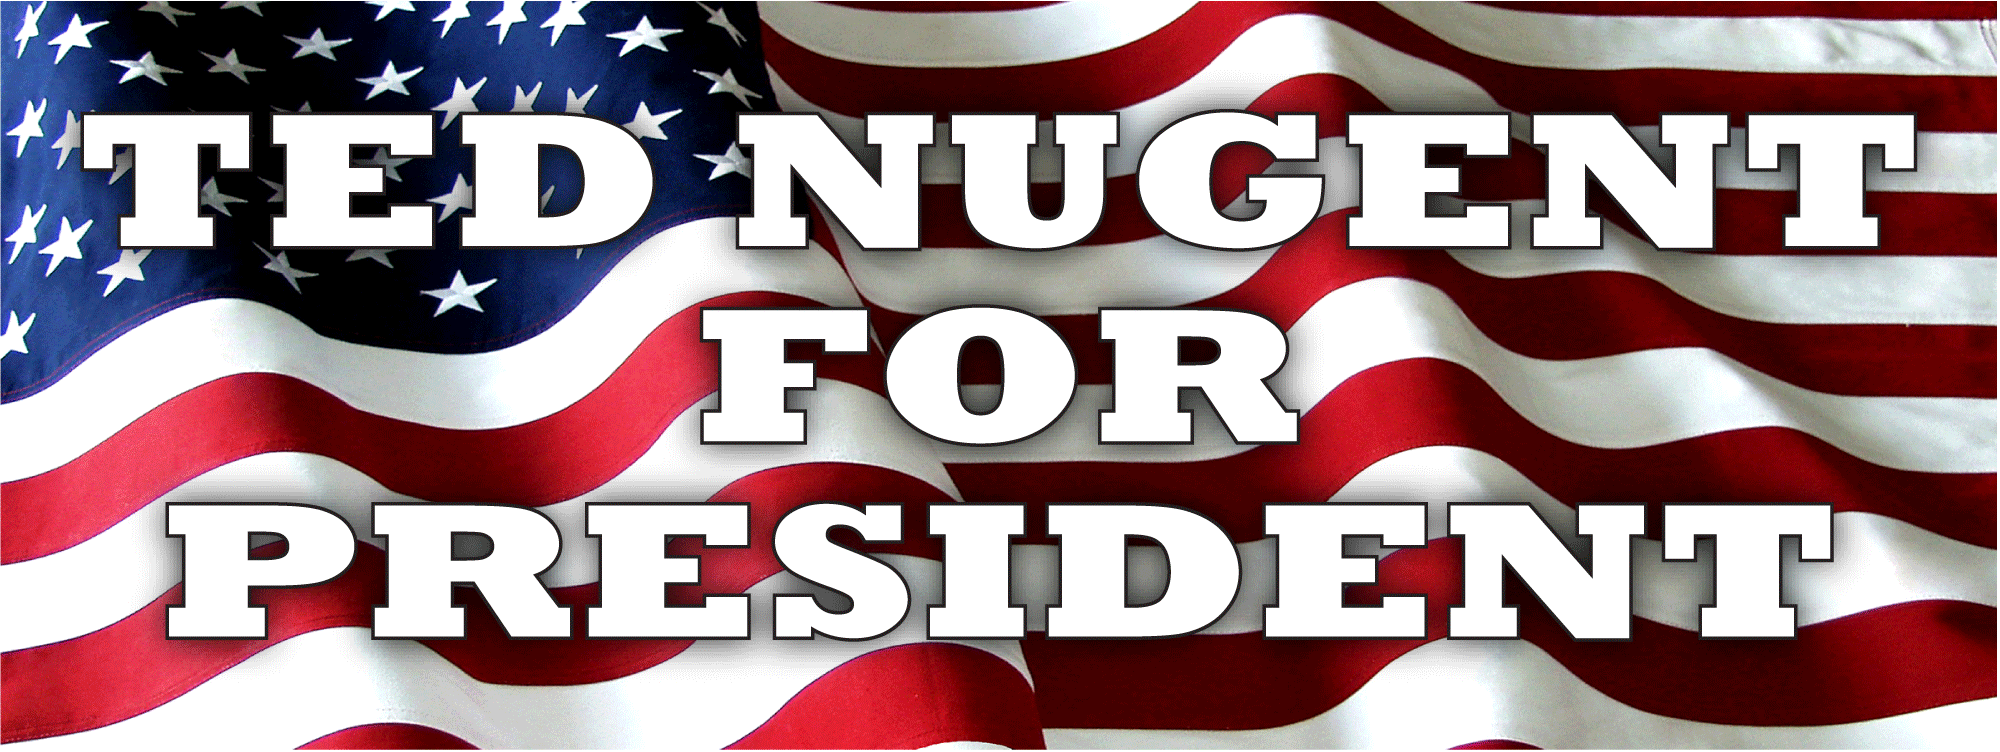 Ted Nuggent for President bumper sticker